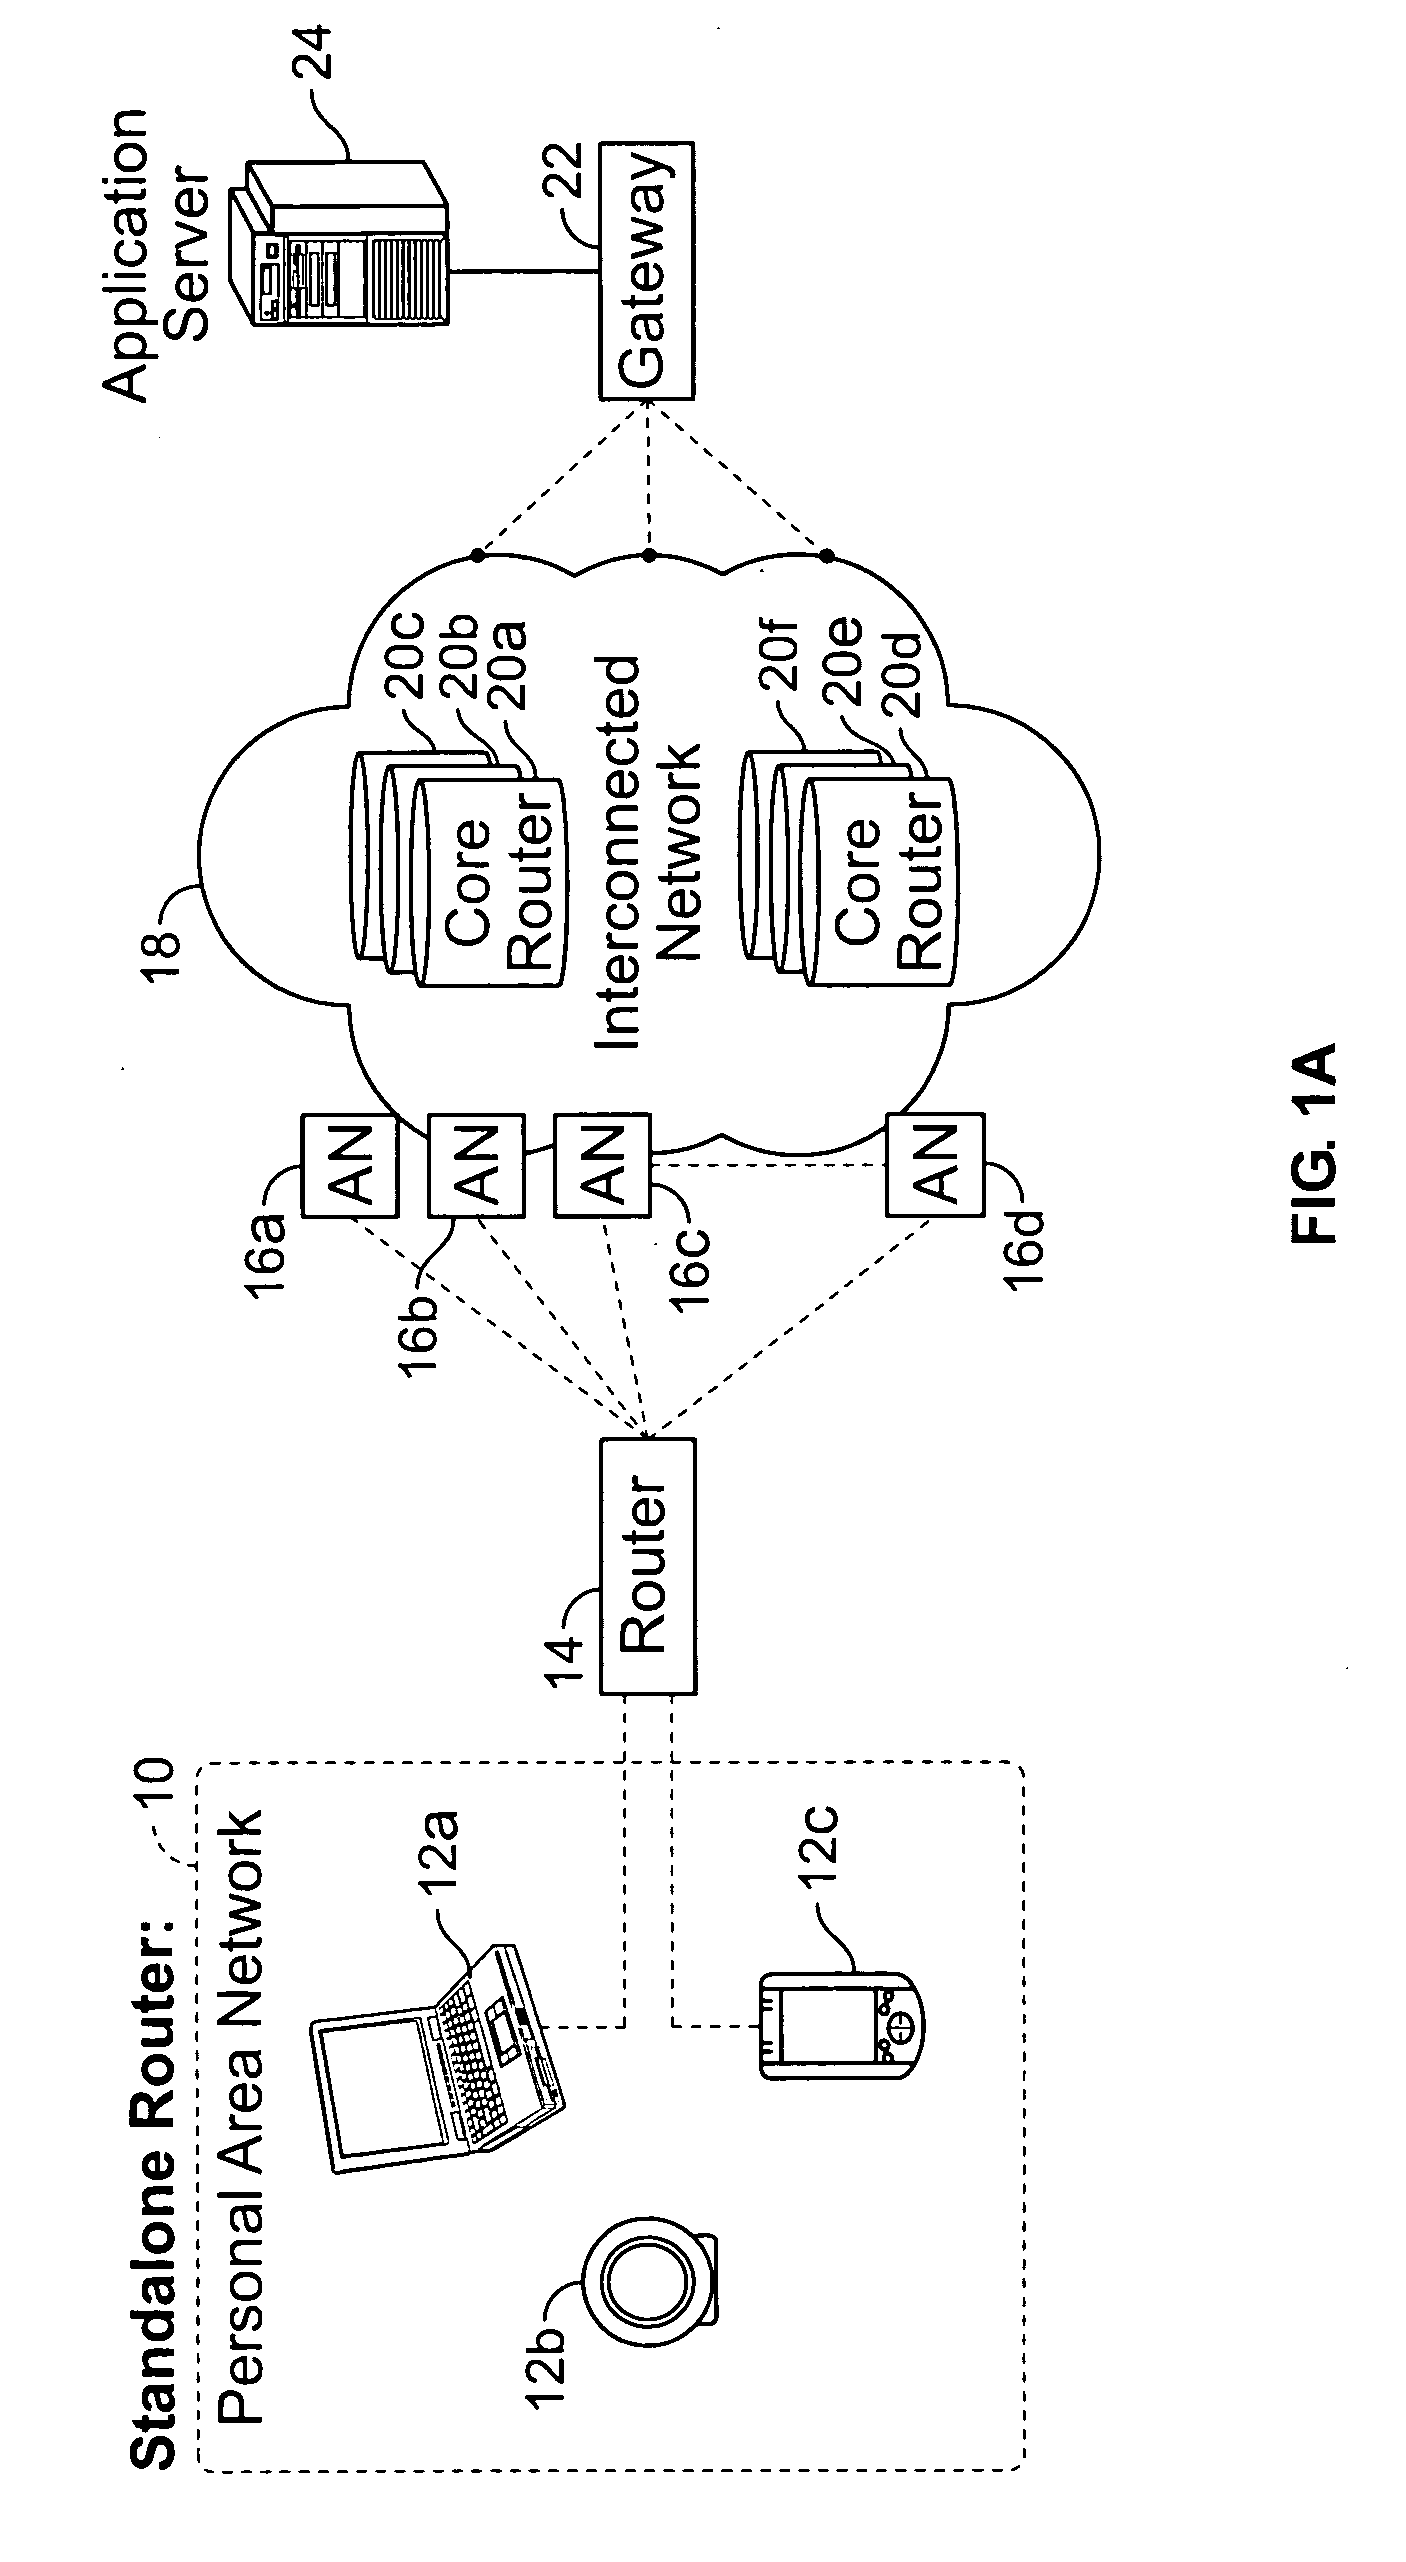 Multi-access terminal with capability for simultaneous connectivity to multiple communication channels